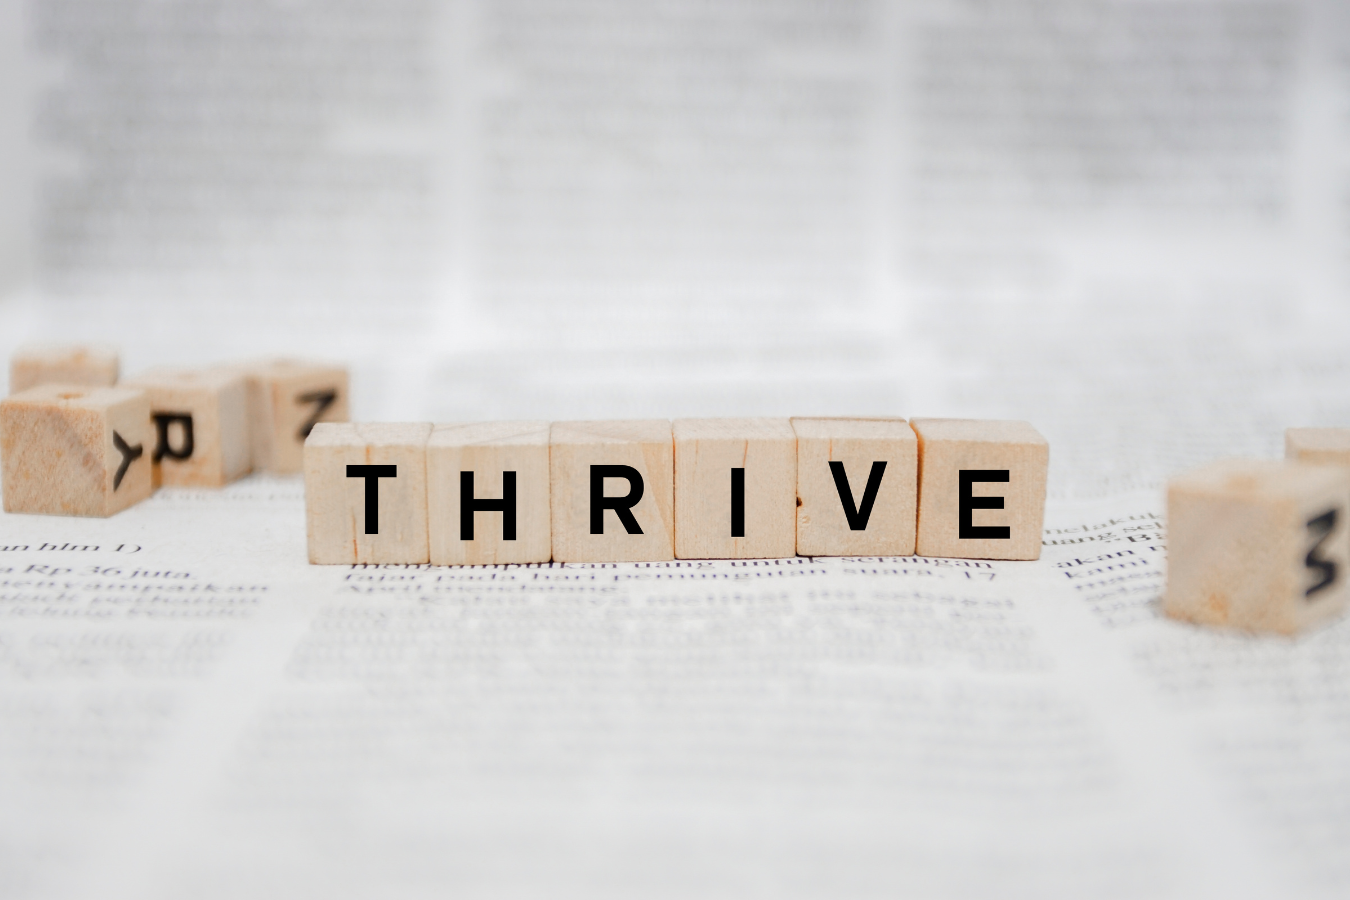 the word thrive is written on wooden blocks on top of a bible